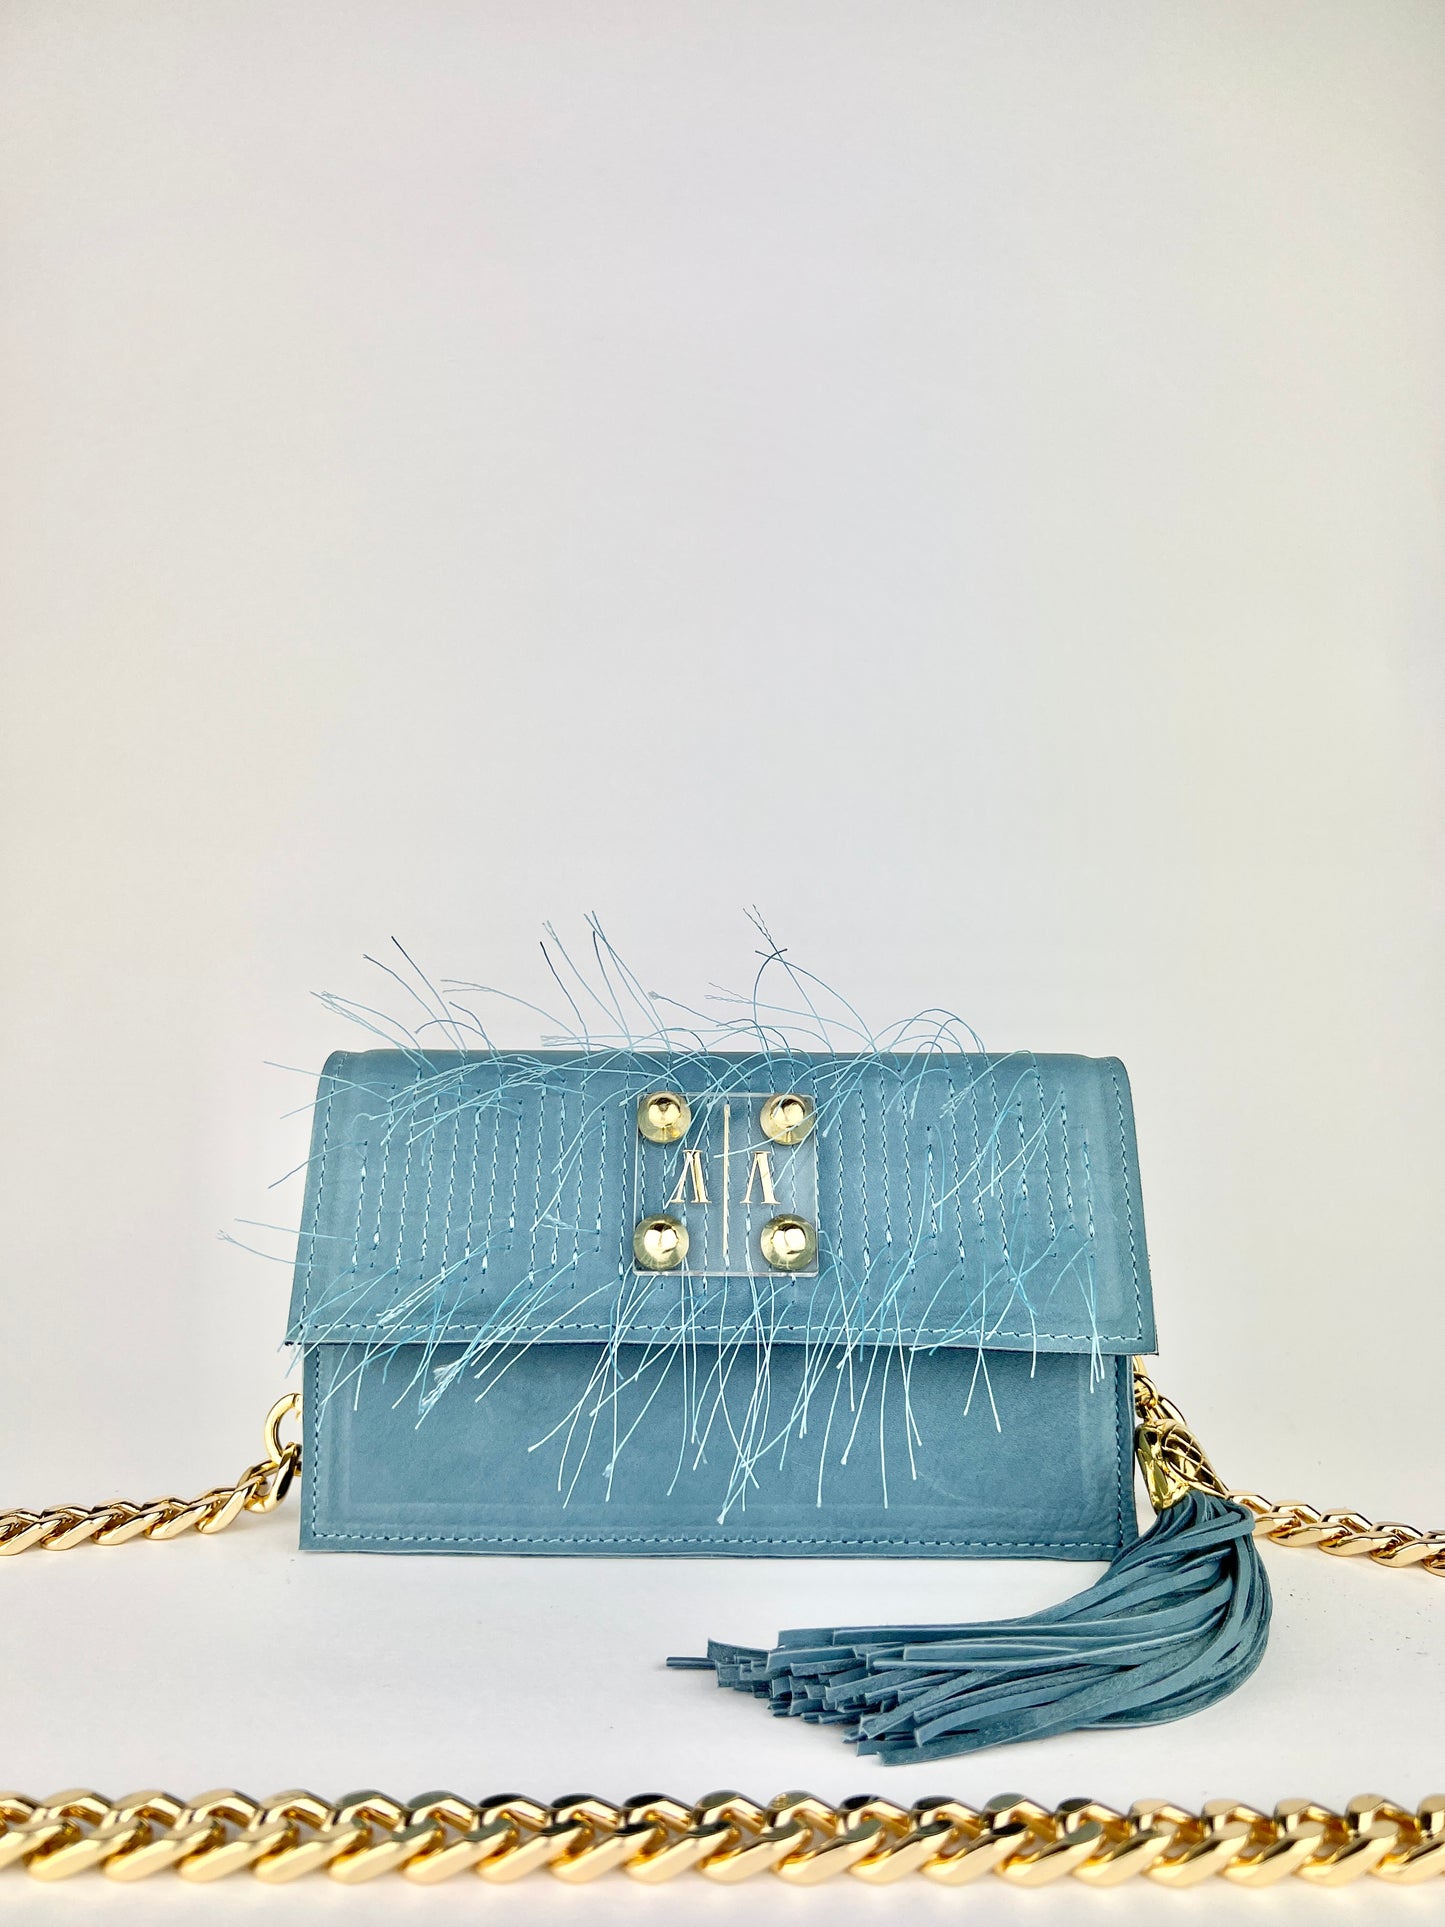 LOULOU BAG  | BLUE NUBUCK LEATHER - Special Edition